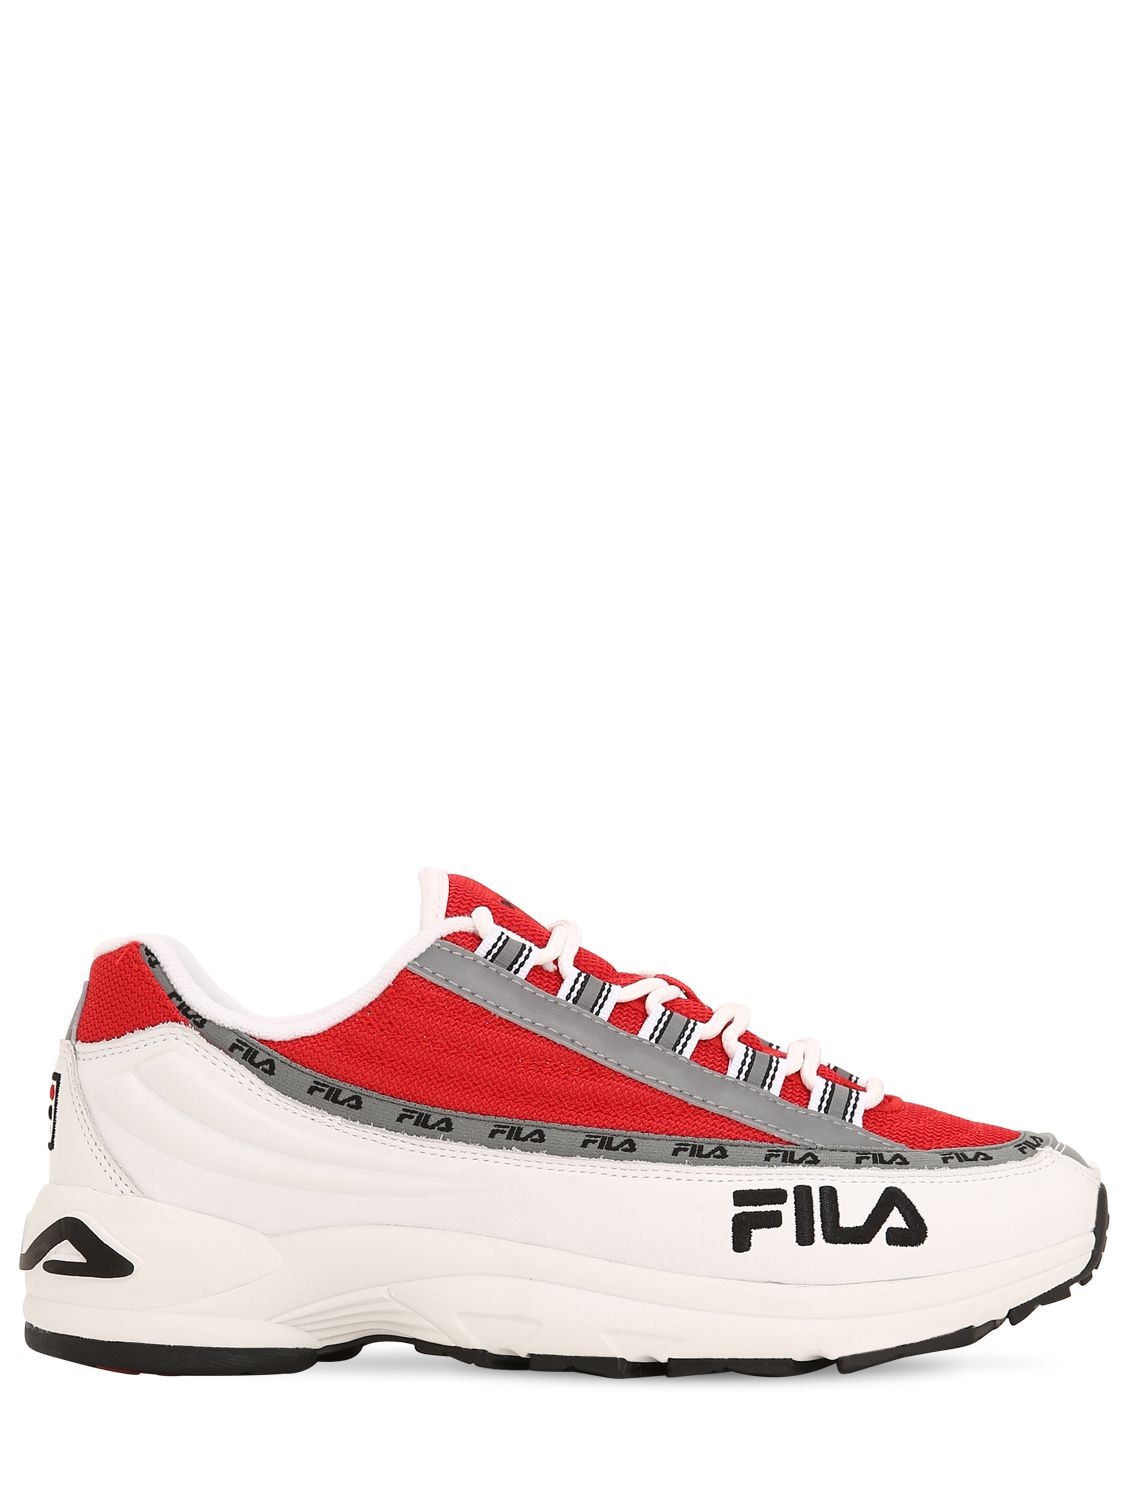 Fila Dragster Sneakers In Red